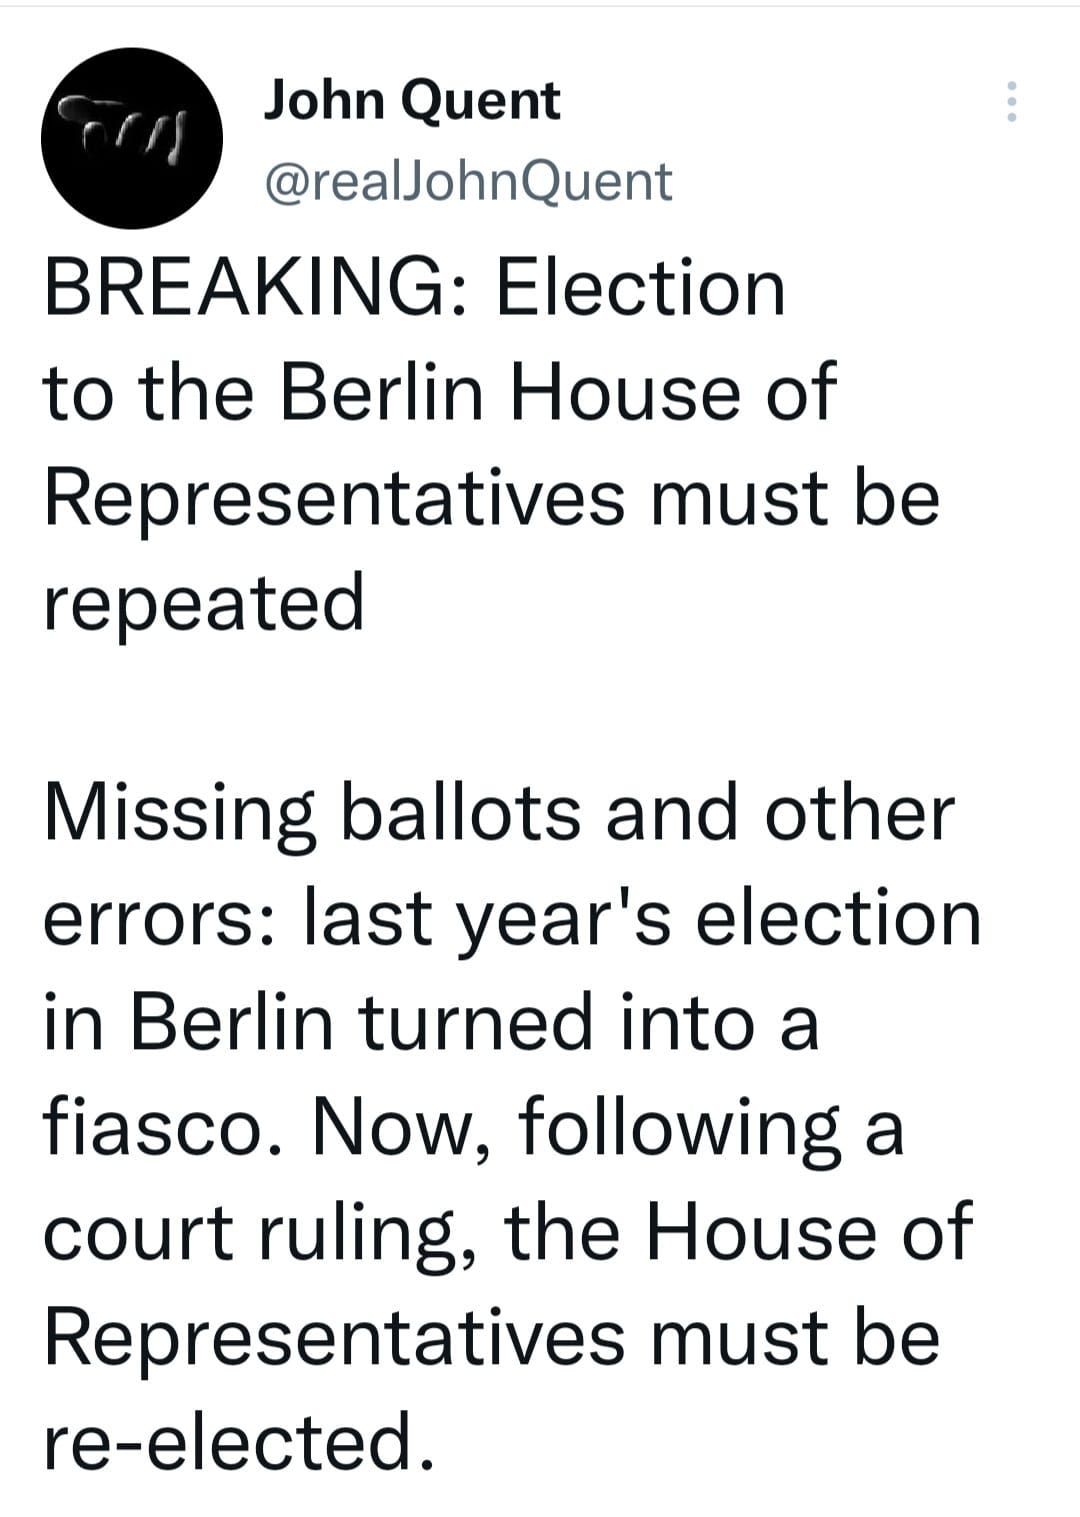 May be an image of text that says 'John Quent @realJohnQuent BREAKING: Election to the Berlin House of Representatives must be repeated Missing ballots and other errors: last year's election in Berlin turned into a fiasco. Now, following a court ruling, the House of Representatives must be re-elected.'